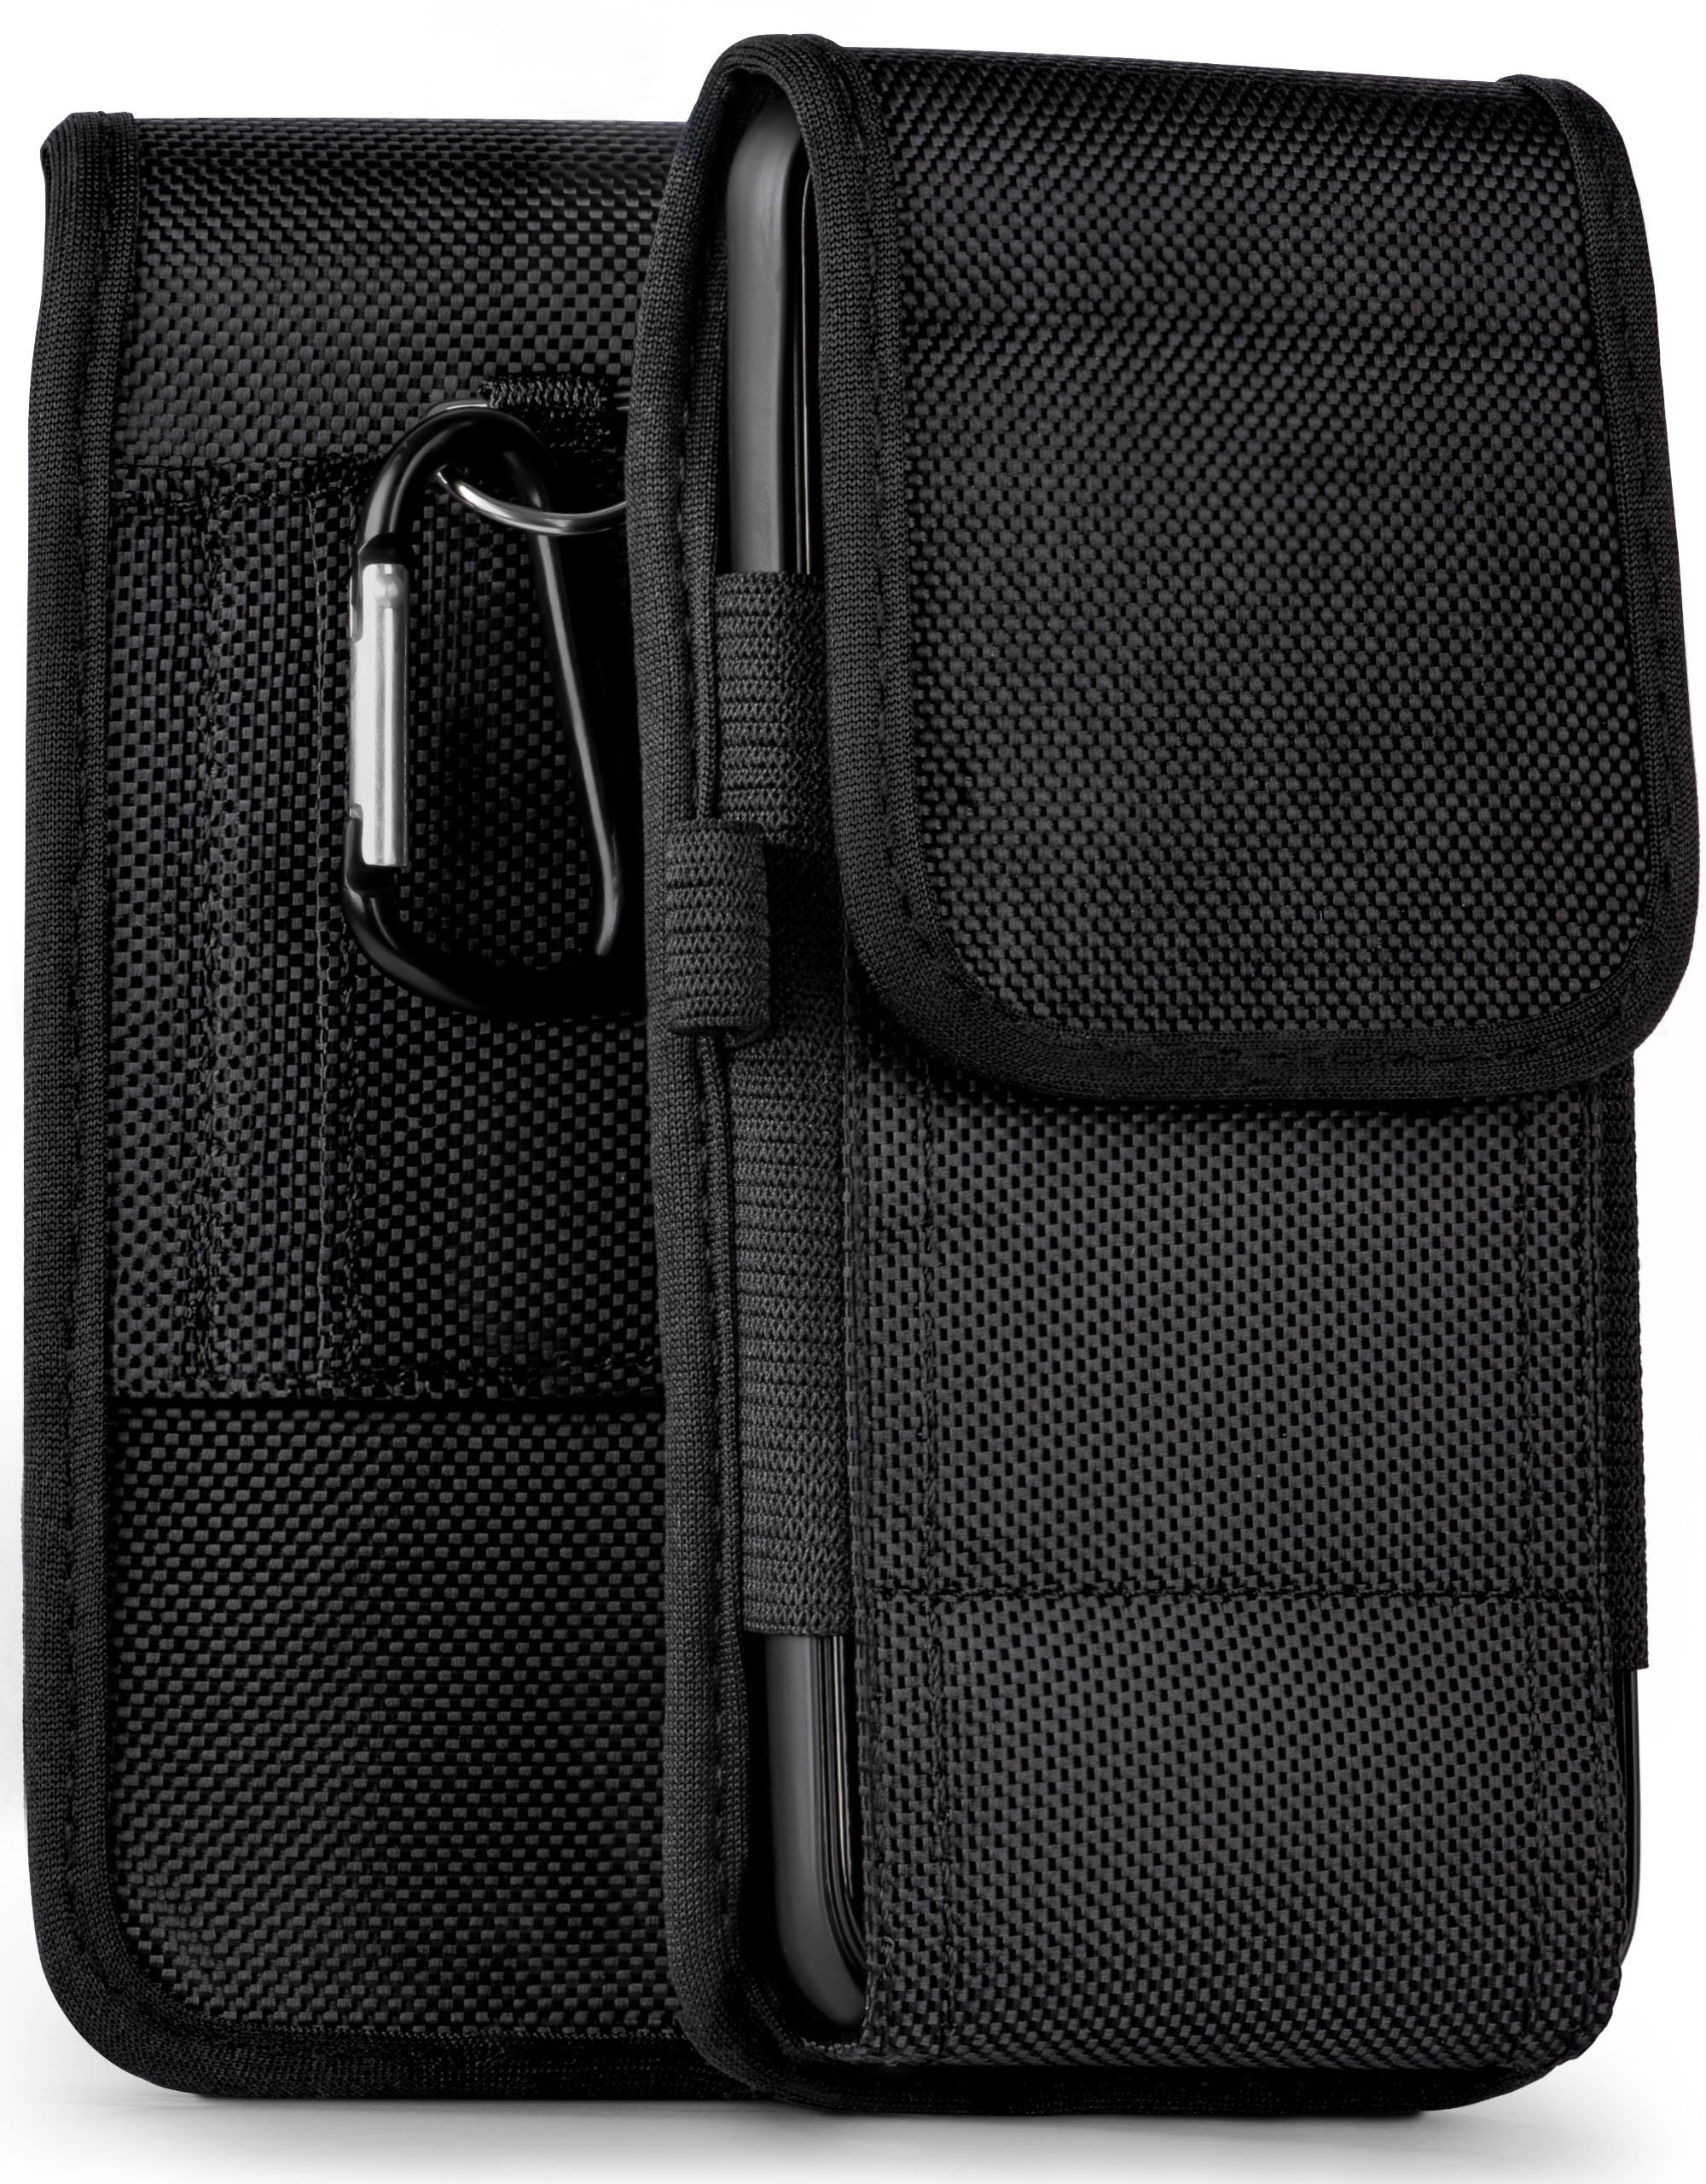 Case, Trail MOEX Agility Holster, Wiko, 2 Plus, Tommy